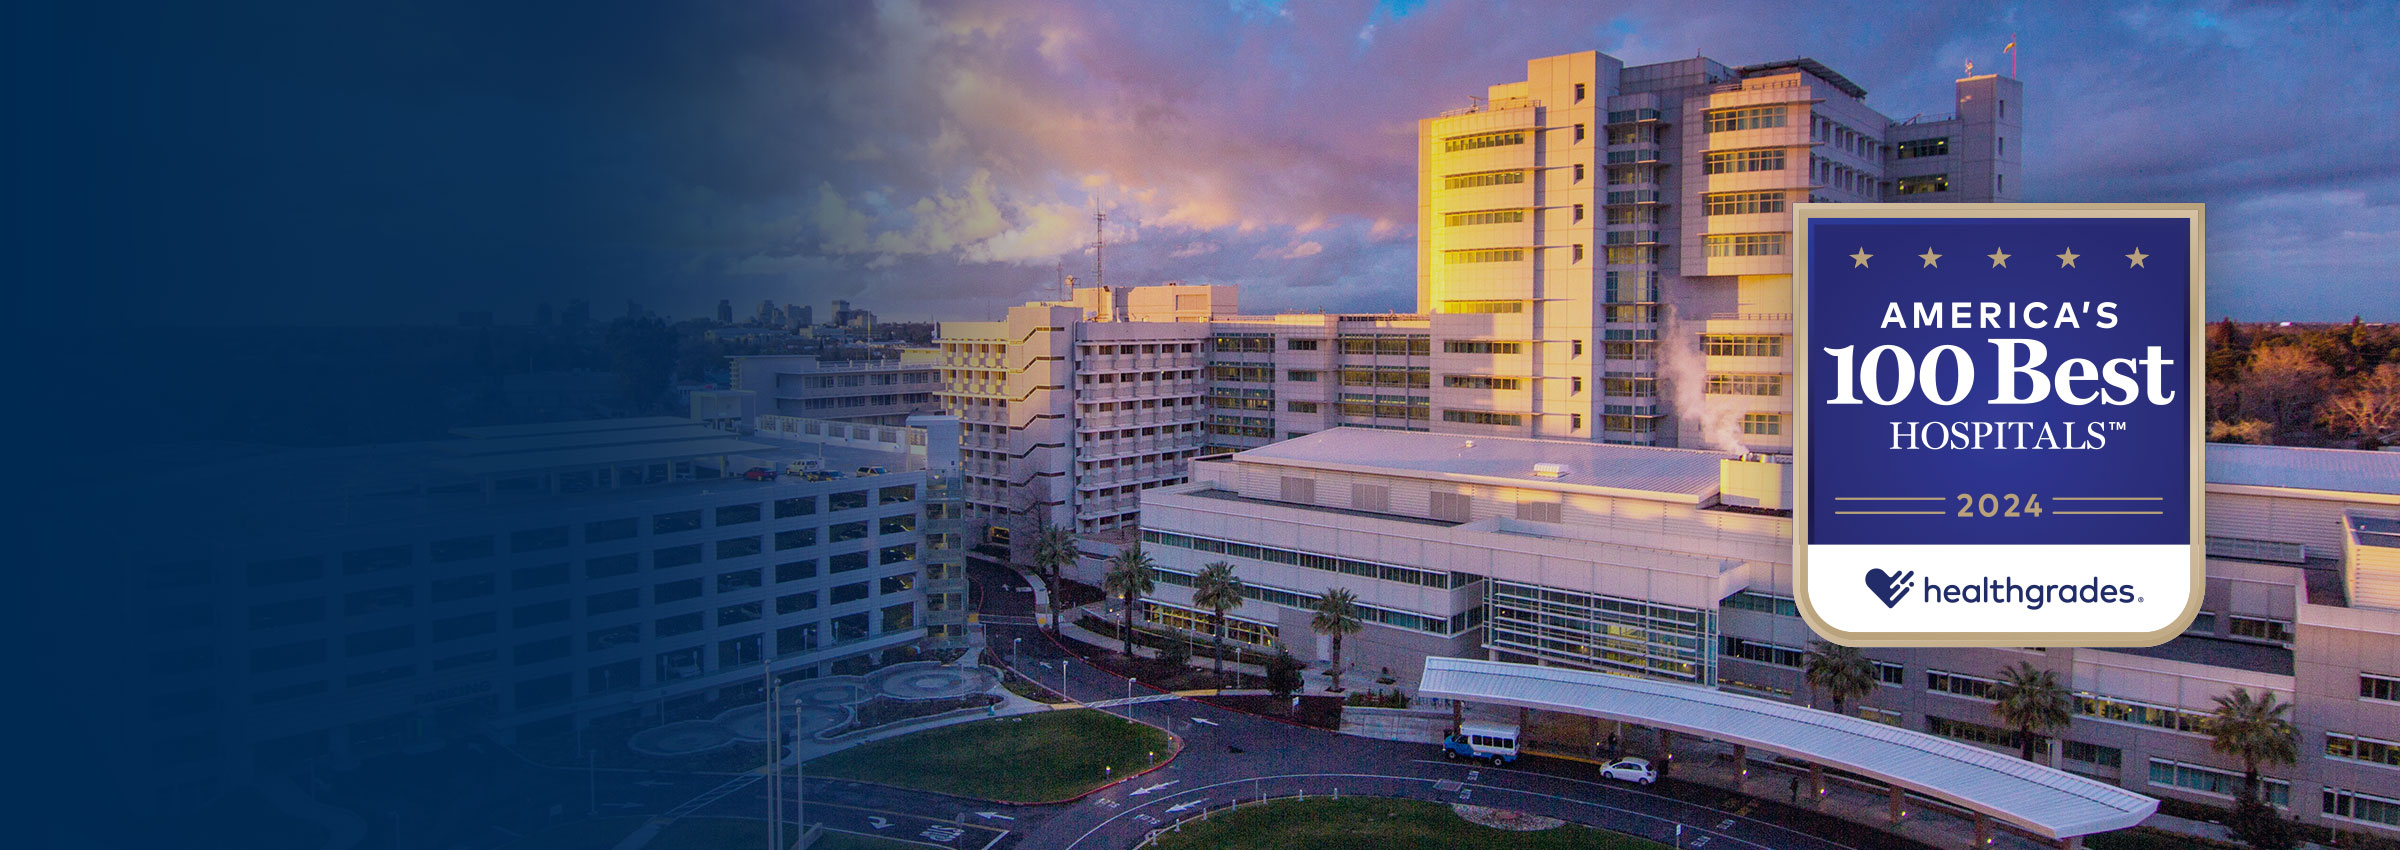 Aerial view of UC Davis Medical Center buildings